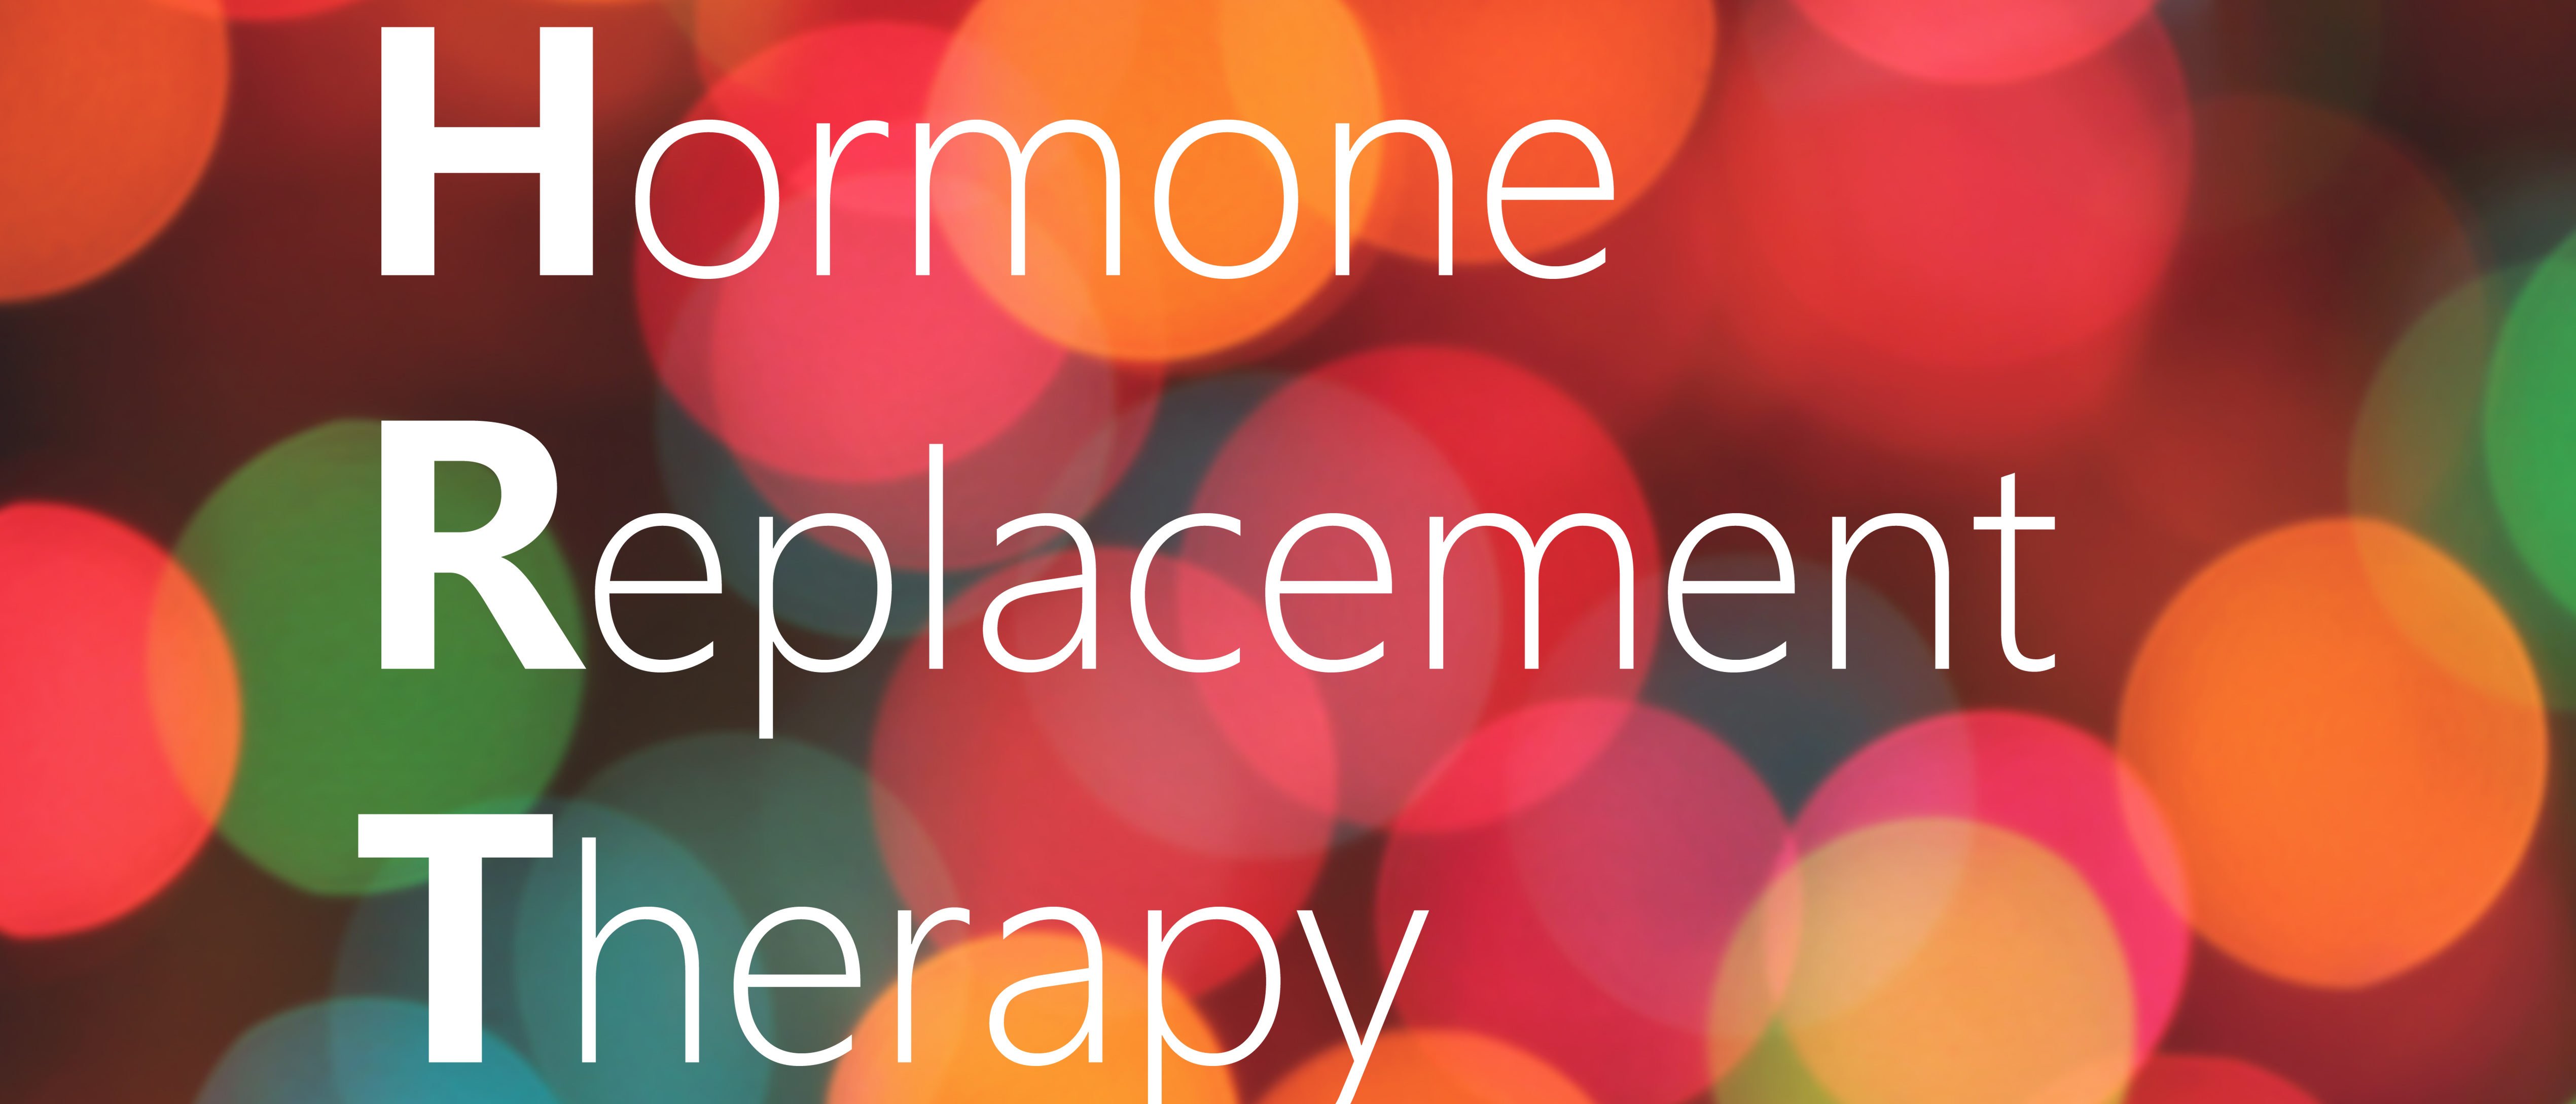 Hormone Replacement Therapy (Shutterstock/chrupka)